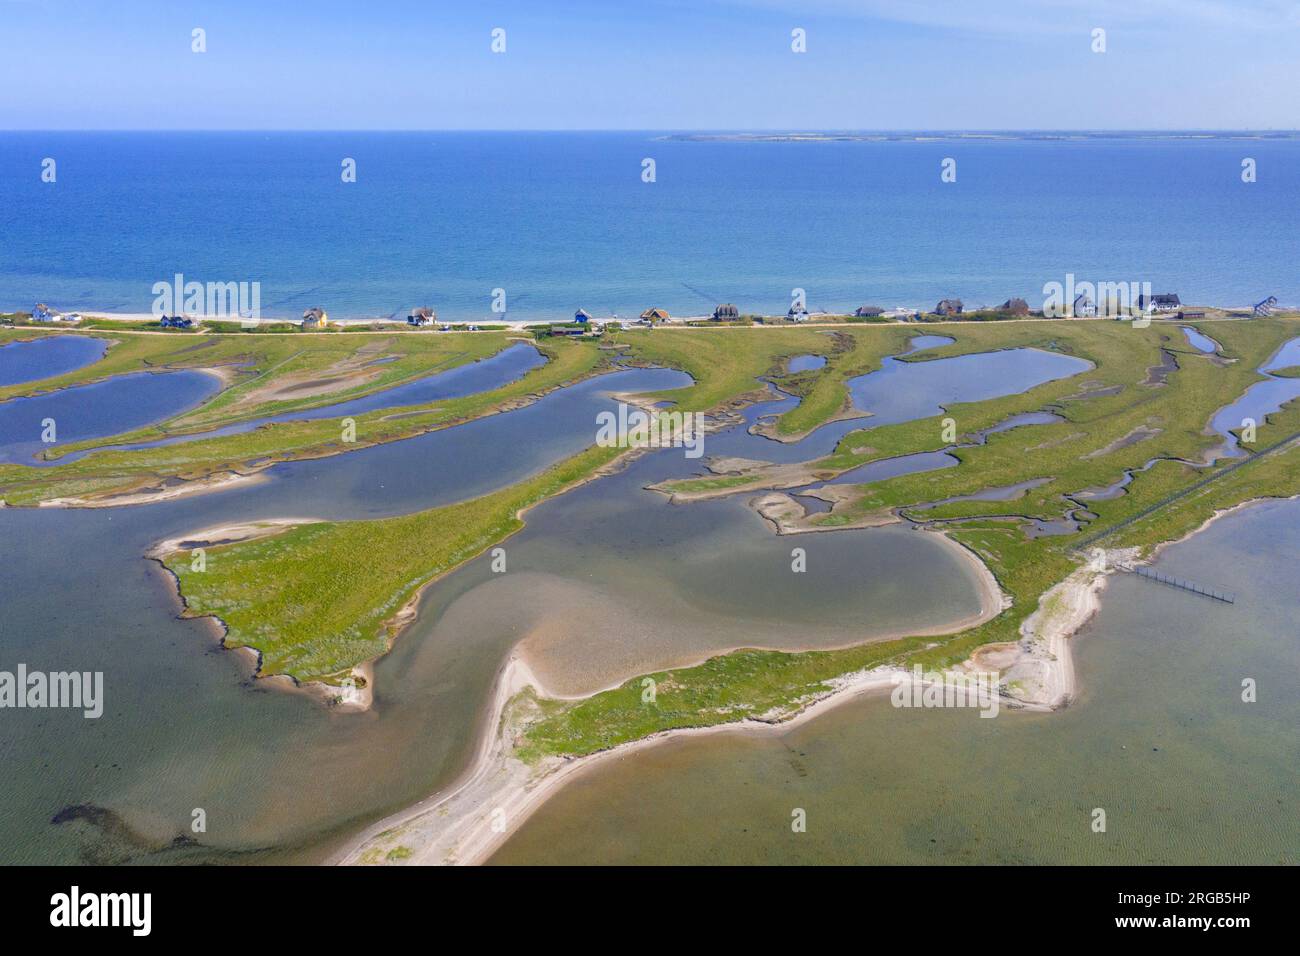 Aerial view over houses on the shore along the Baltic Sea coast at Steinwarder peninsula, Heiligenhafen, Ostholstein, Schleswig-Holstein, Germany Stock Photo